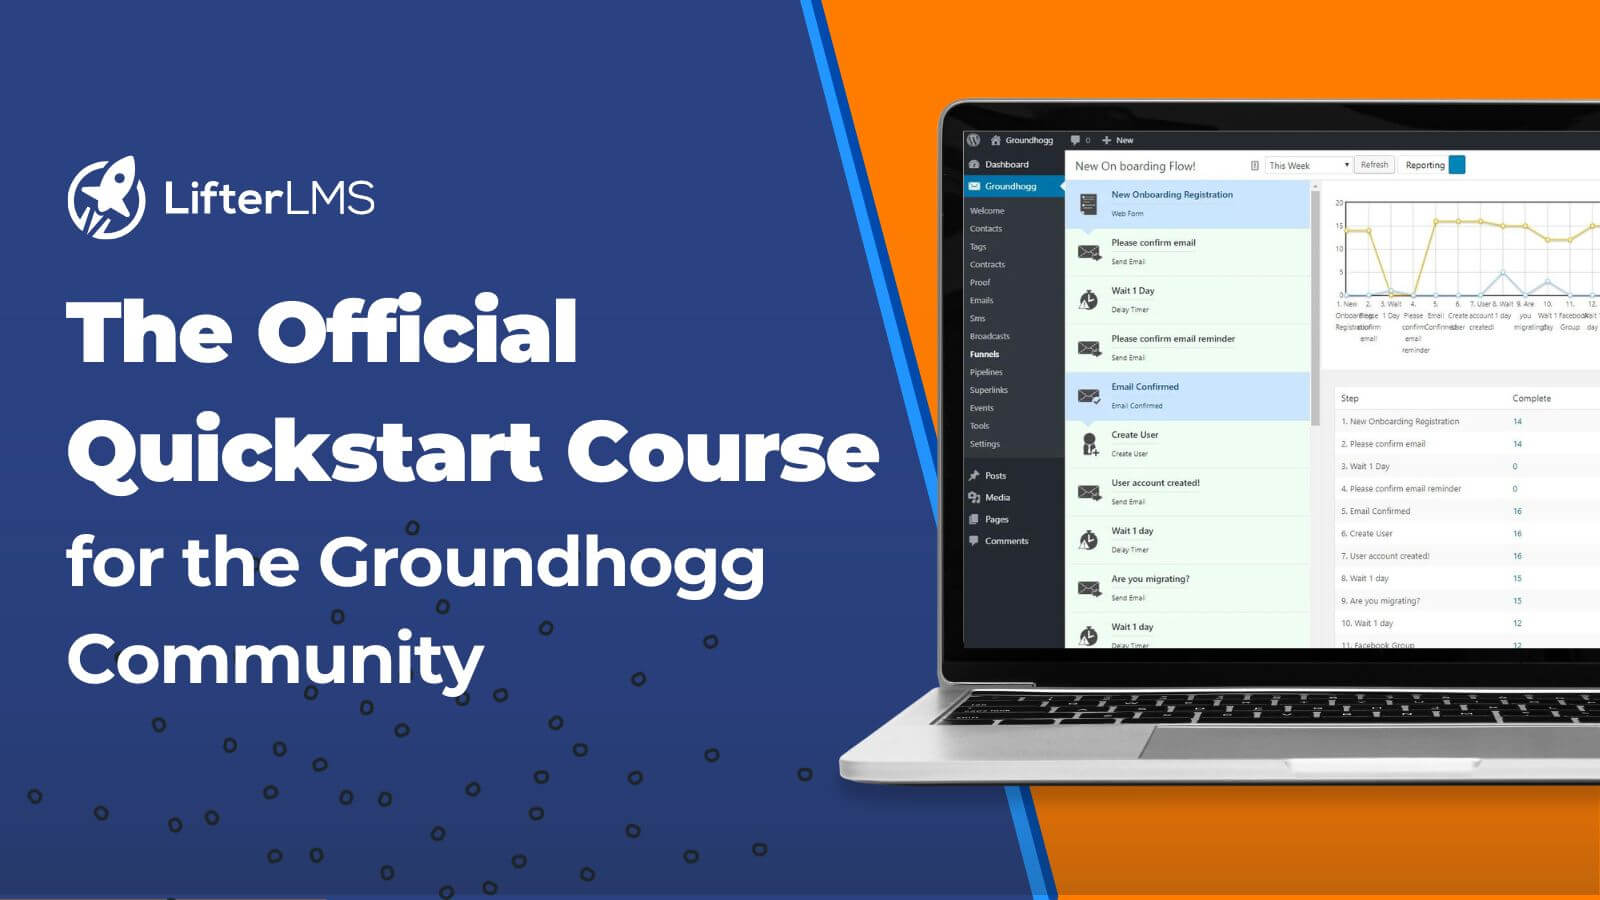 The Official Quickstart Course for the Groundhogg Community on LifterLMS Academy